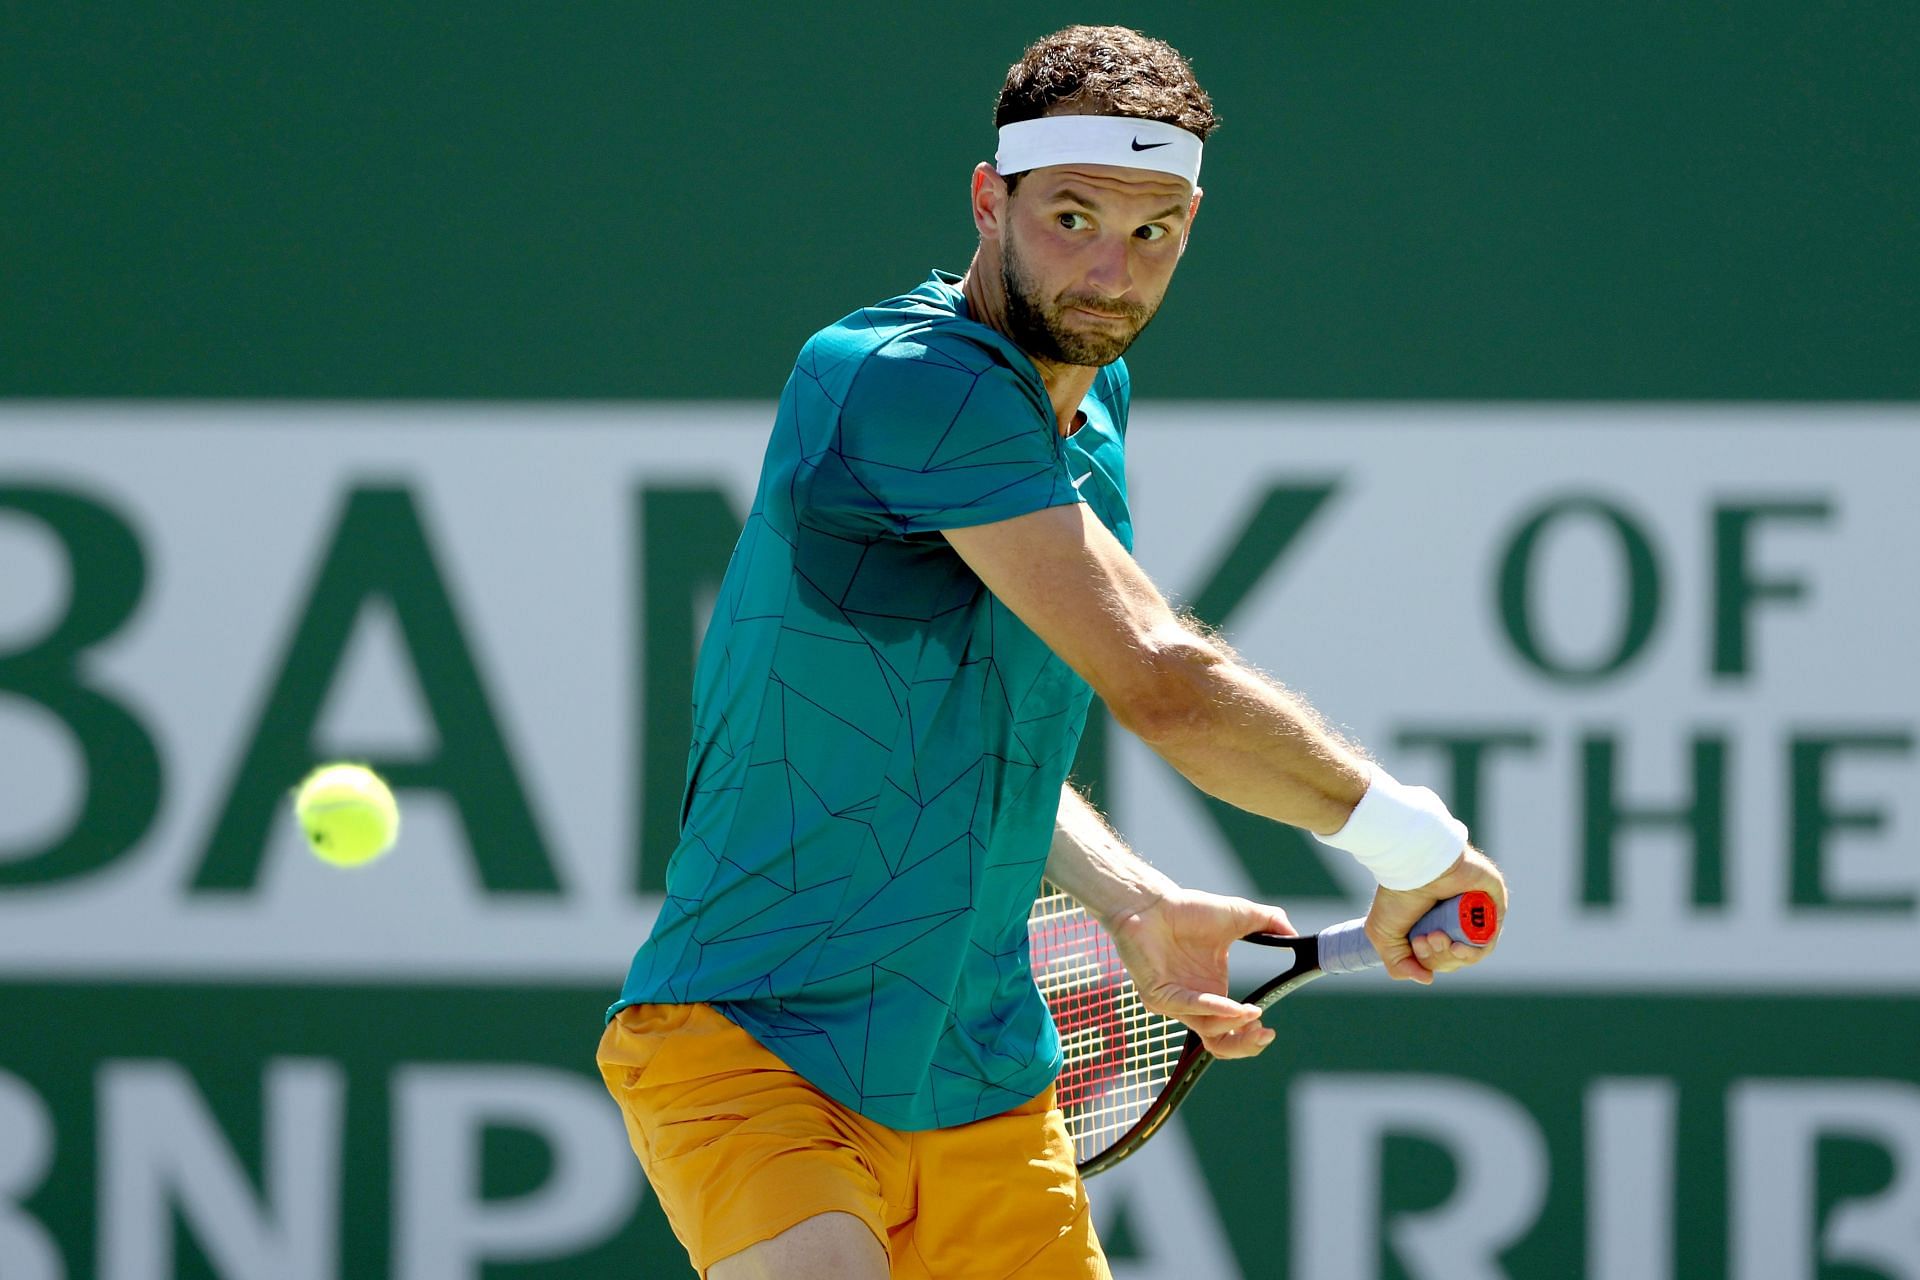 Grigor Dimitrov at the 2022 Indian Wells Open.